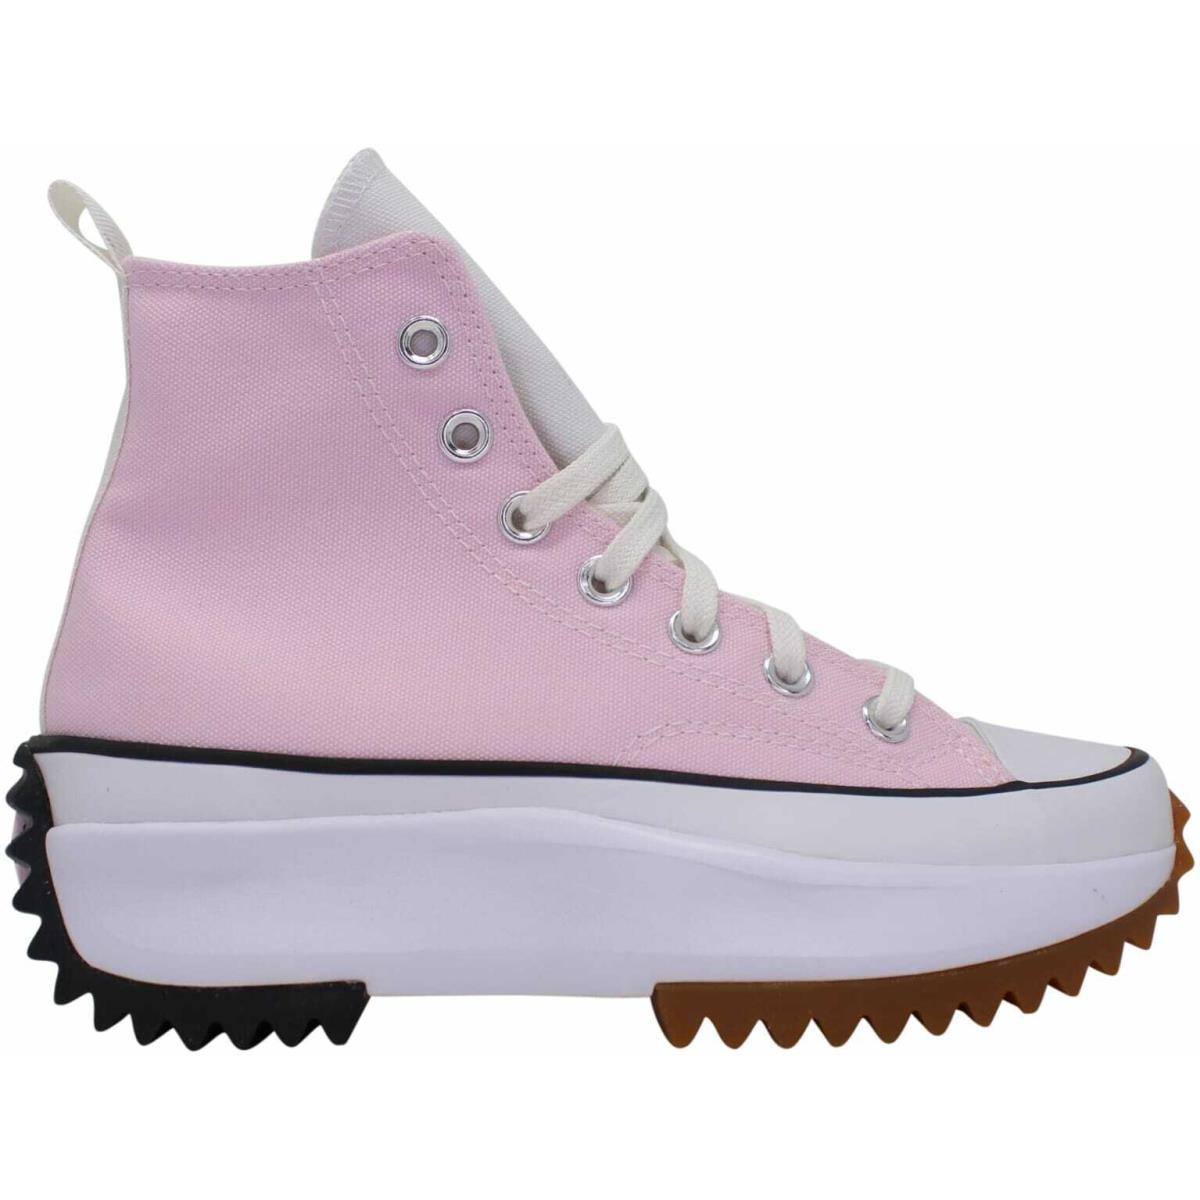 Converse Run Star Hike Hi 170968C Men`s Pink/white Athletic Sneakers Shoes HS597 - Pink & White